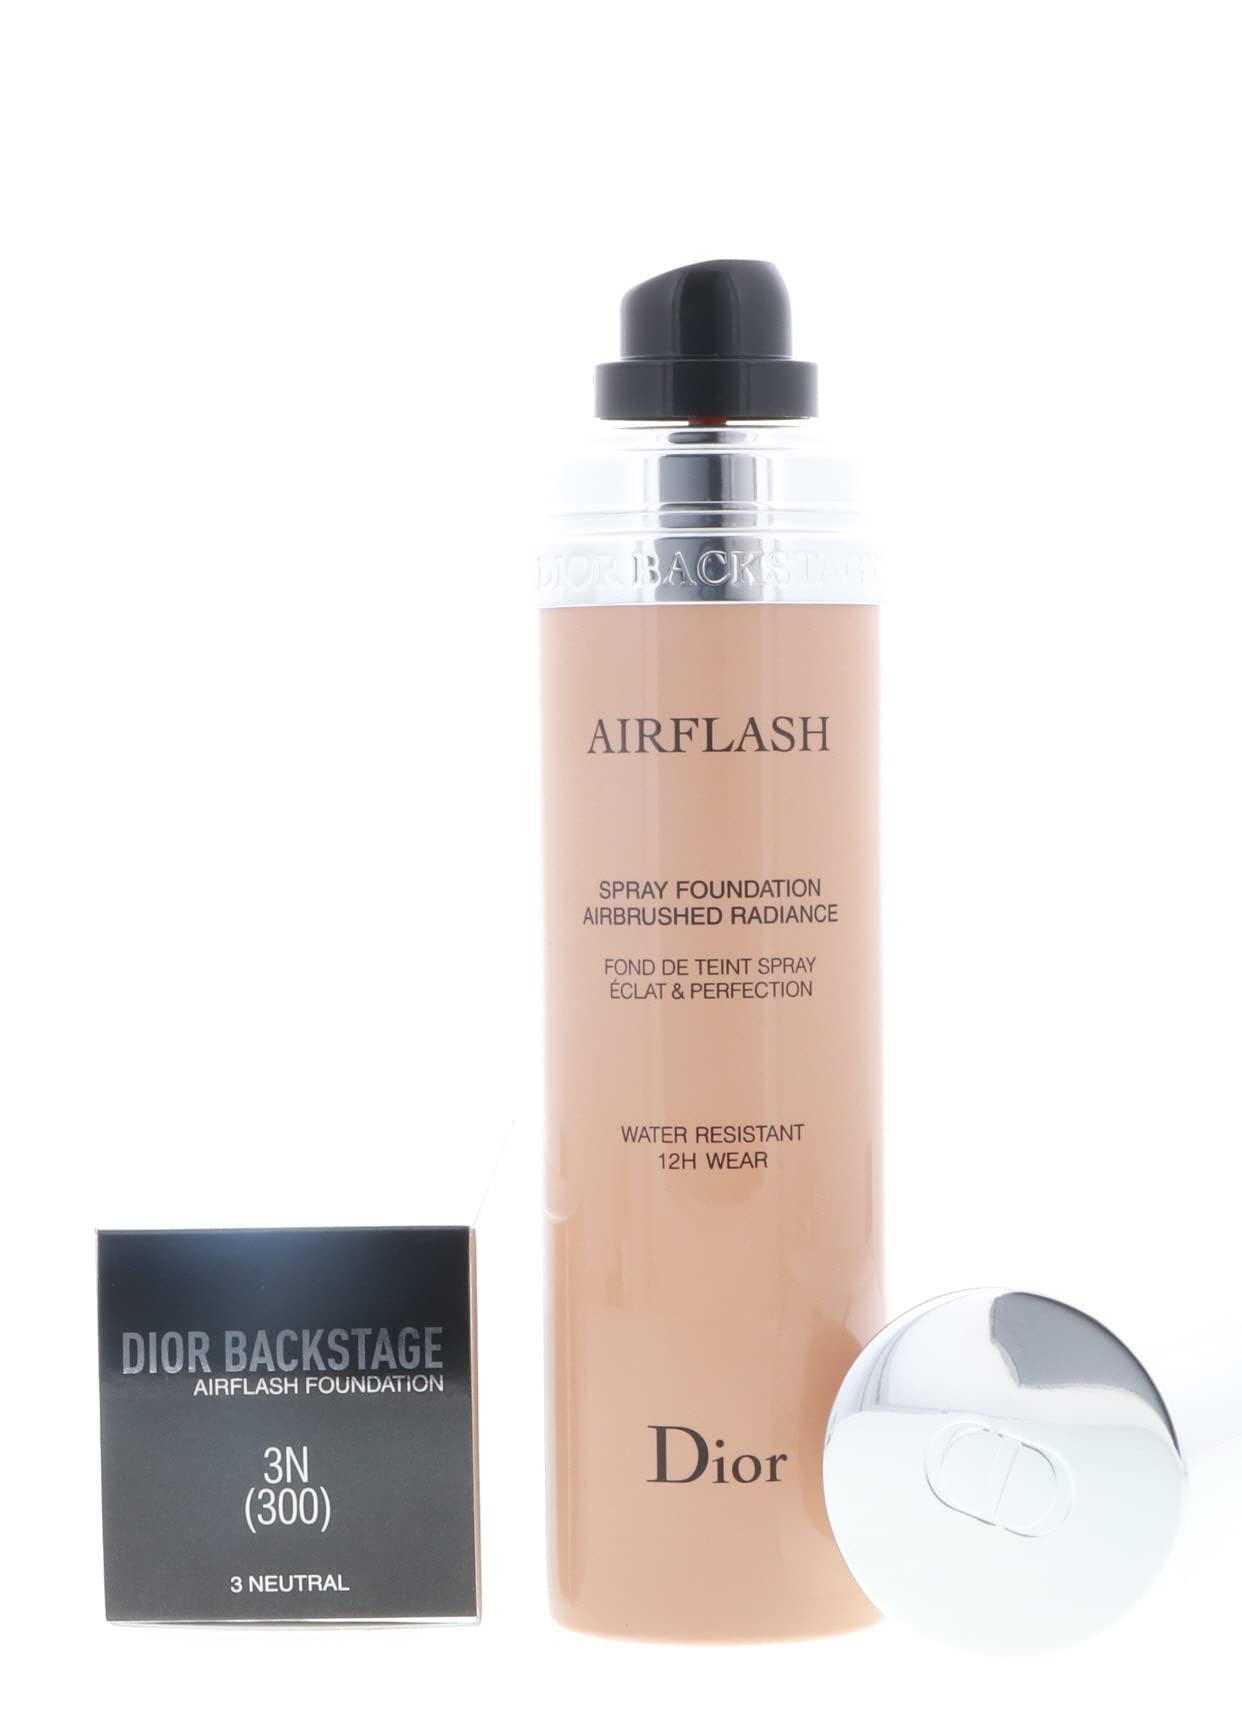 Dior Airflash Airbrush Foundation Review  Is It Life Changing  YouTube